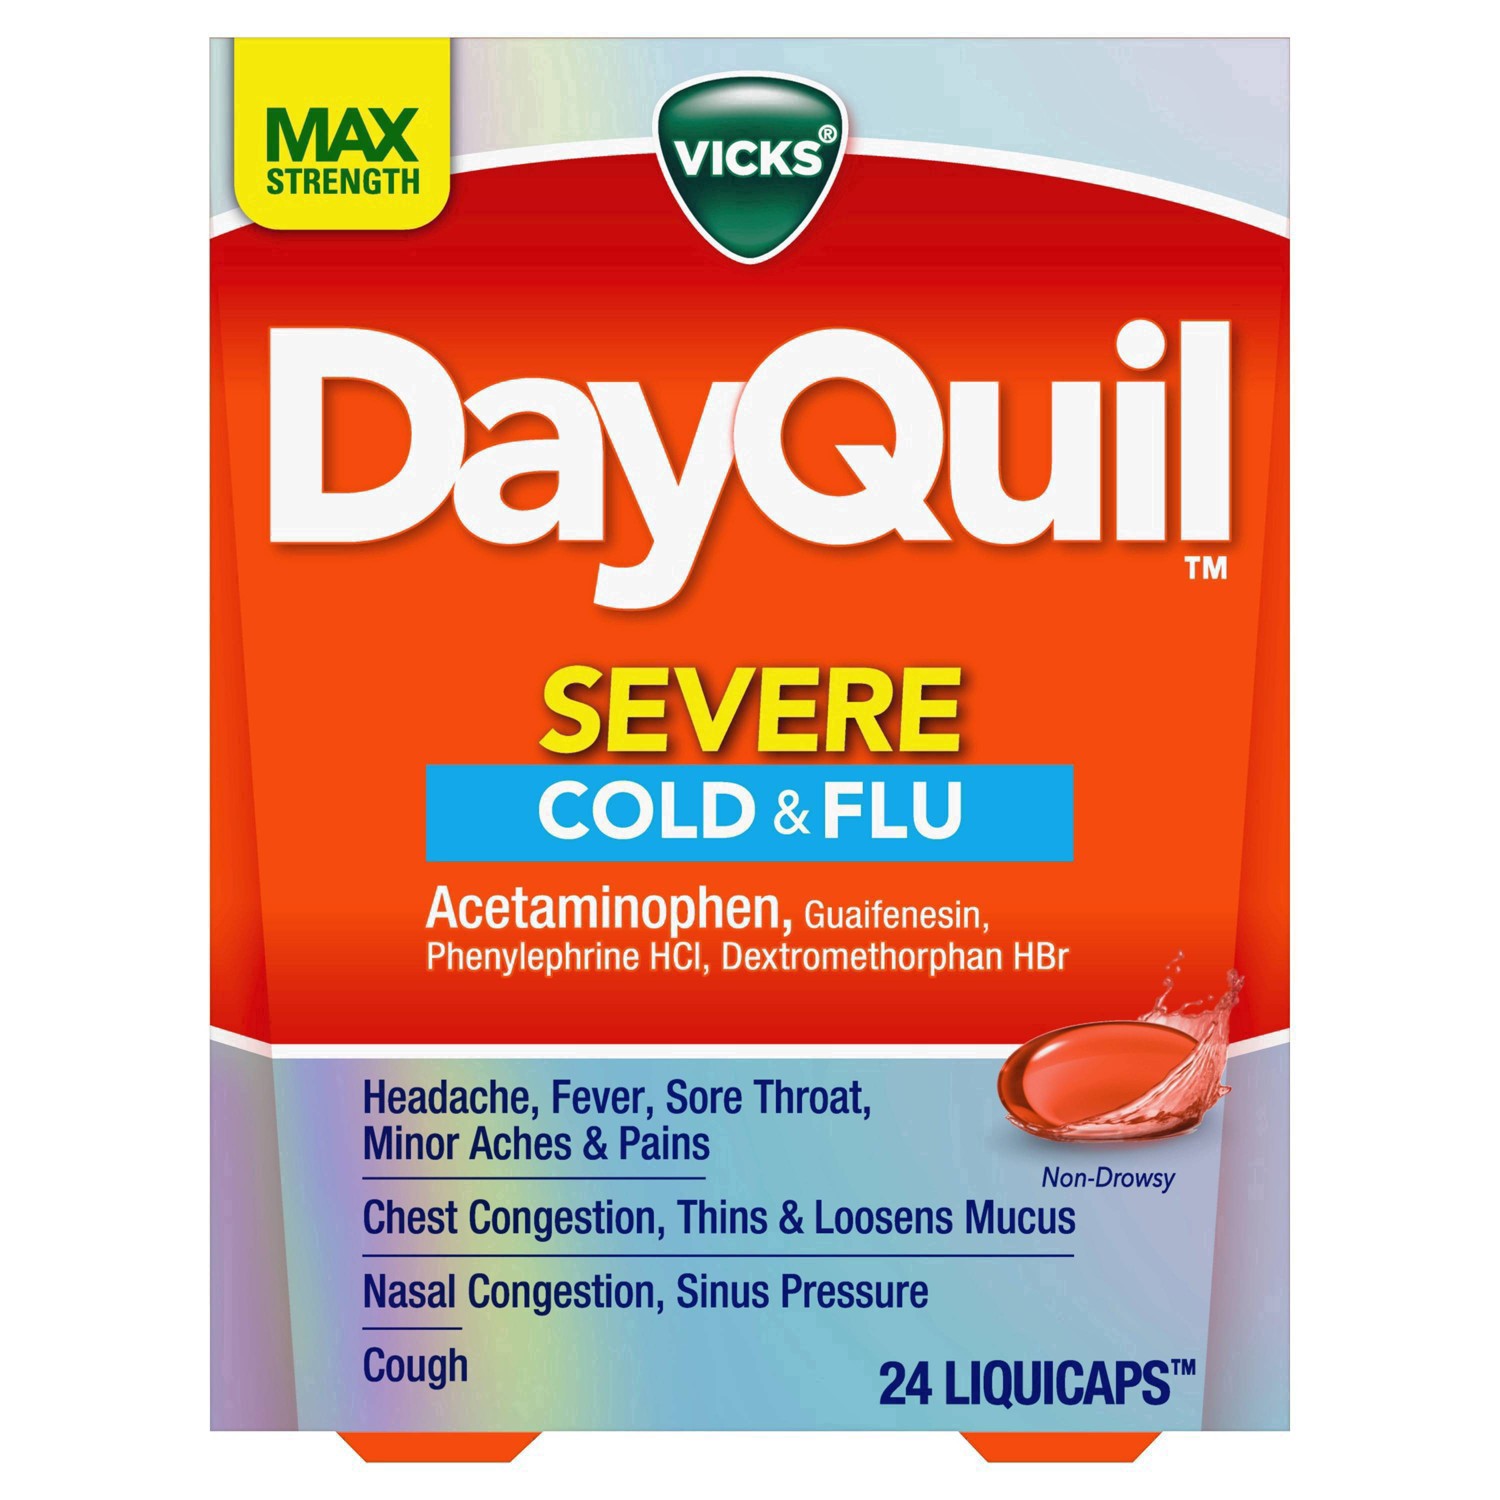 slide 43 of 46, Vicks DayQuil SEVERE Cold & Flu Medicine, Maximum Strength 9-Symptom Non-Drowsy Daytime Relief for Headache, Fever, Sore Throat, Minor Aches and Pains, Chest Congestion, Stuffy Nose, Nasal Congestion, Sinus Pressure, and Cough, 24 Liquicaps, 24 ct